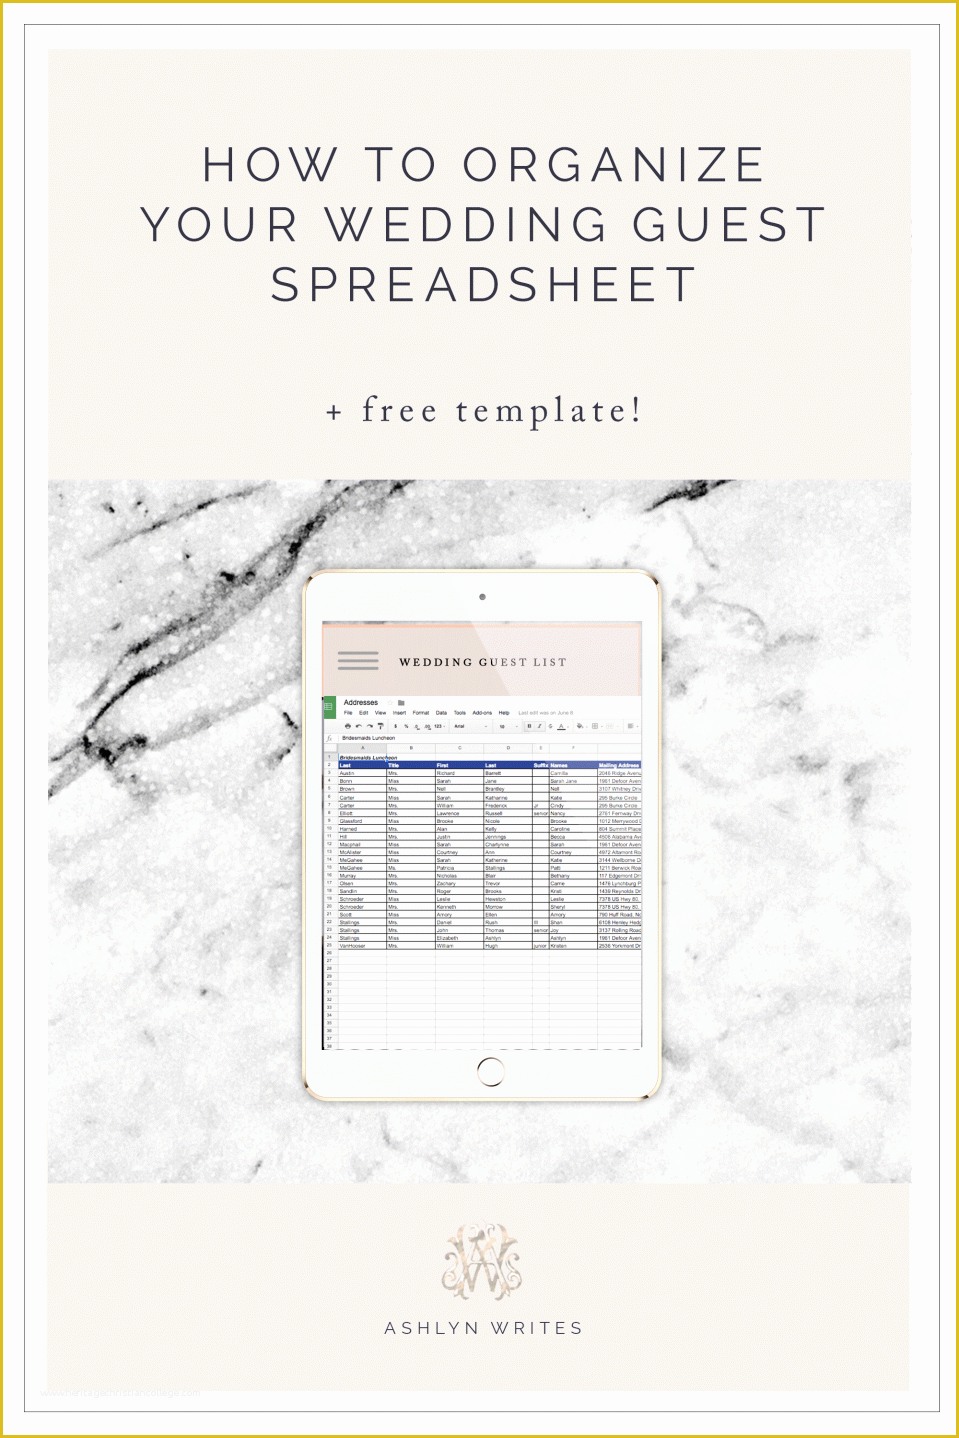 Free Wedding Blogger Templates Of How to organize A Wedding Guest List Spreadsheet Free